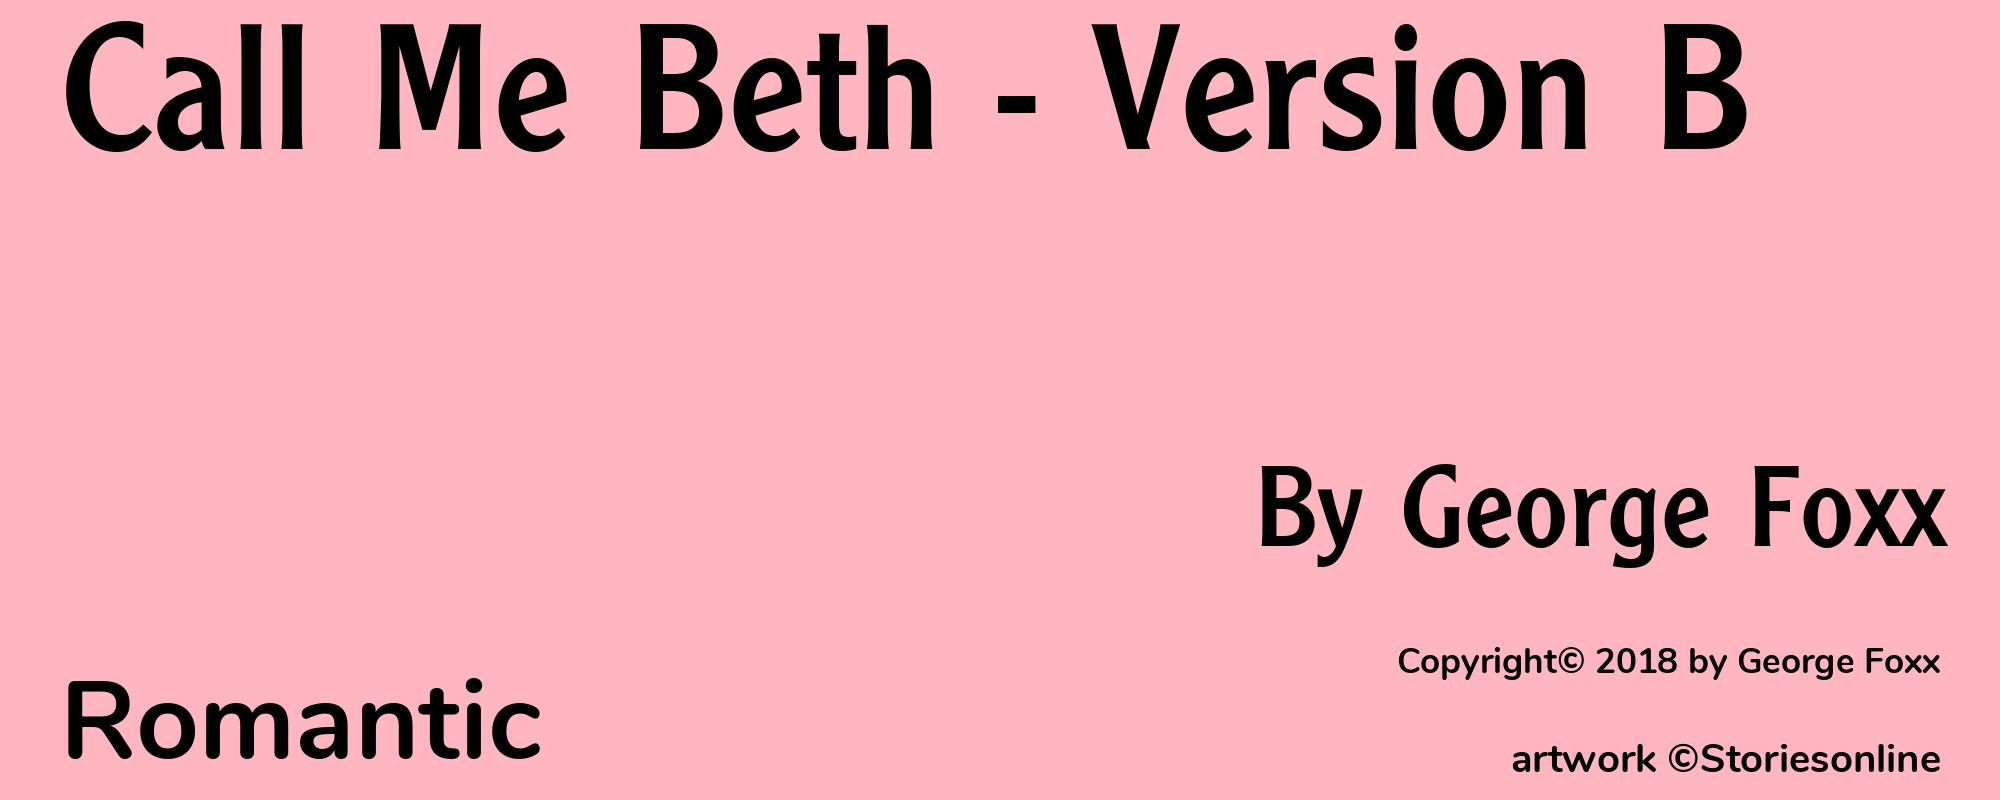 Call Me Beth - Version B - Cover